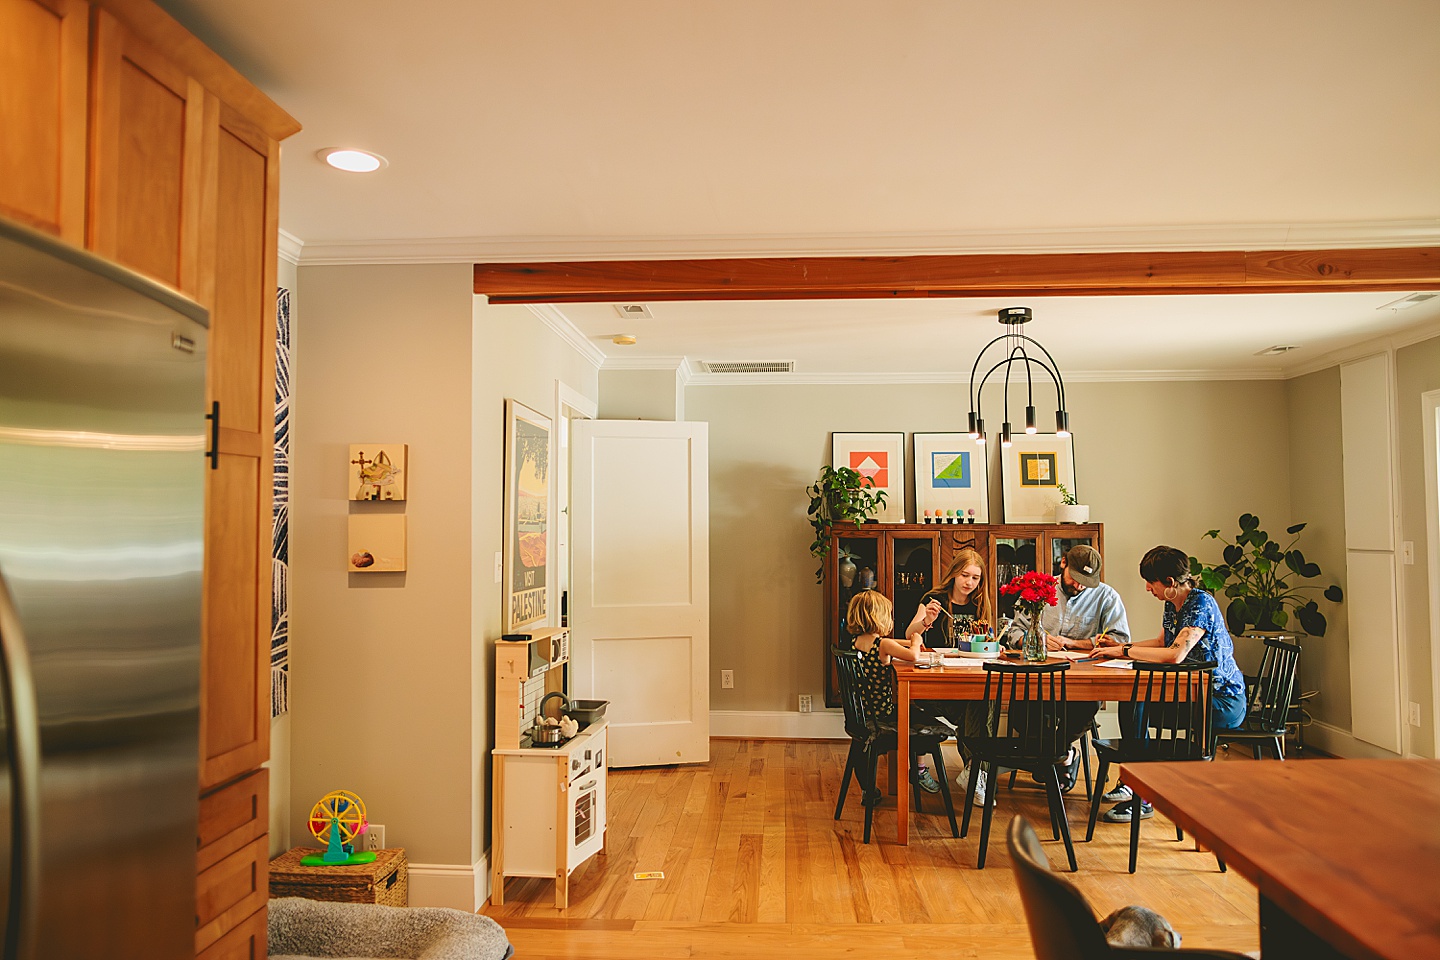 Family painting together in dining room